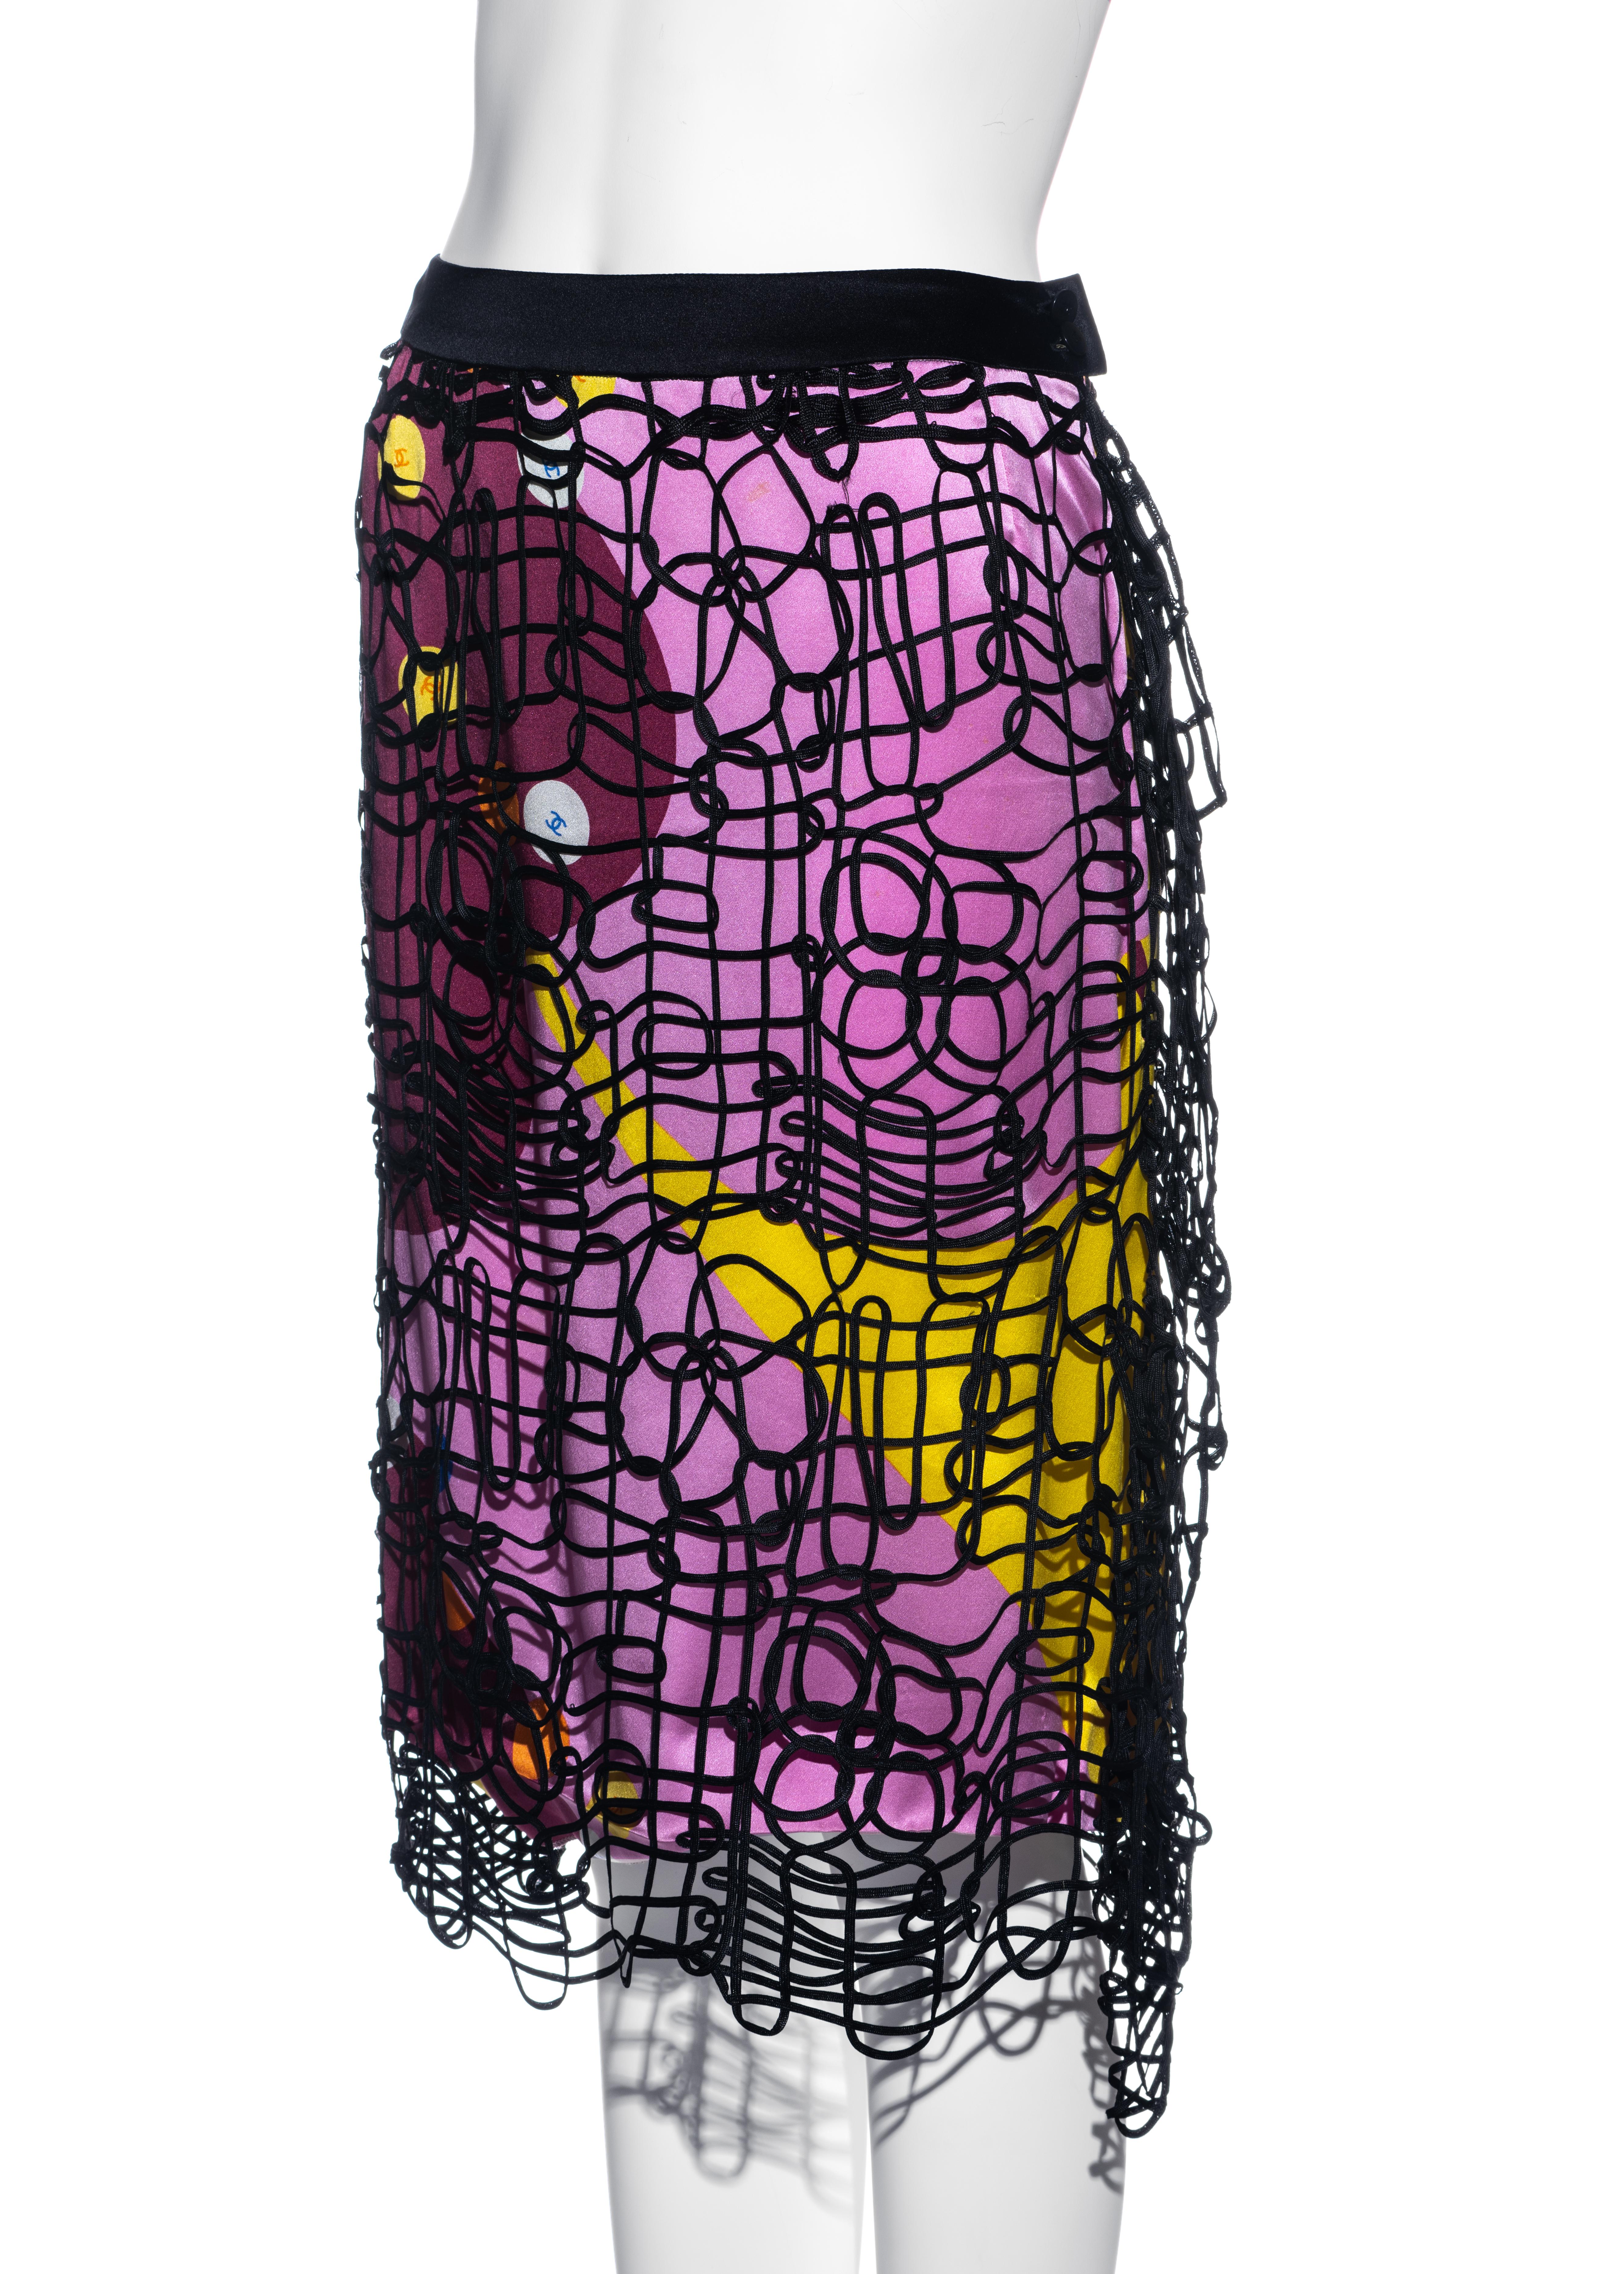 Women's Chanel by Karl Lagerfeld multicoloured silk skirt with ribbon overlay, ss 2000